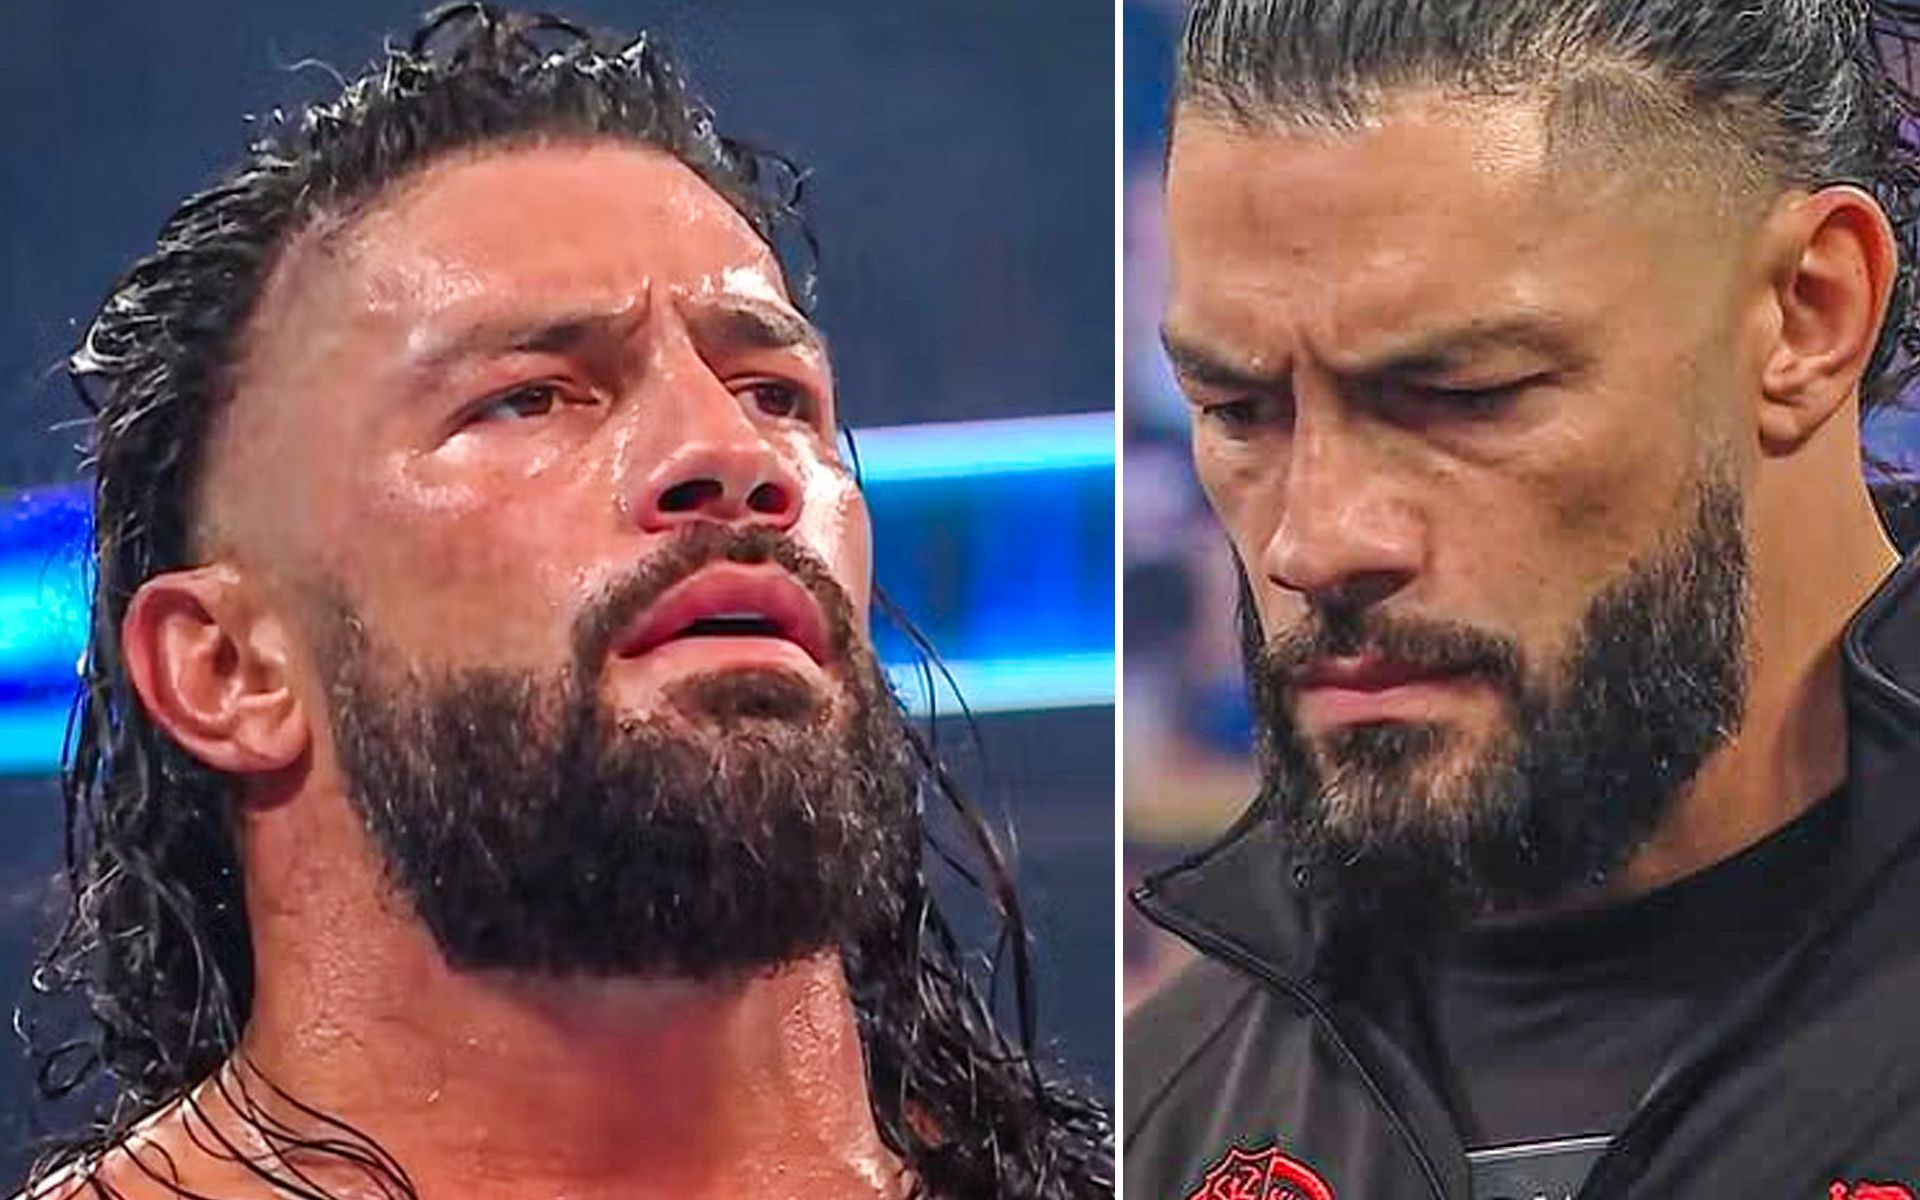 Roman Reigns is not advertised for any upcoming premium live event